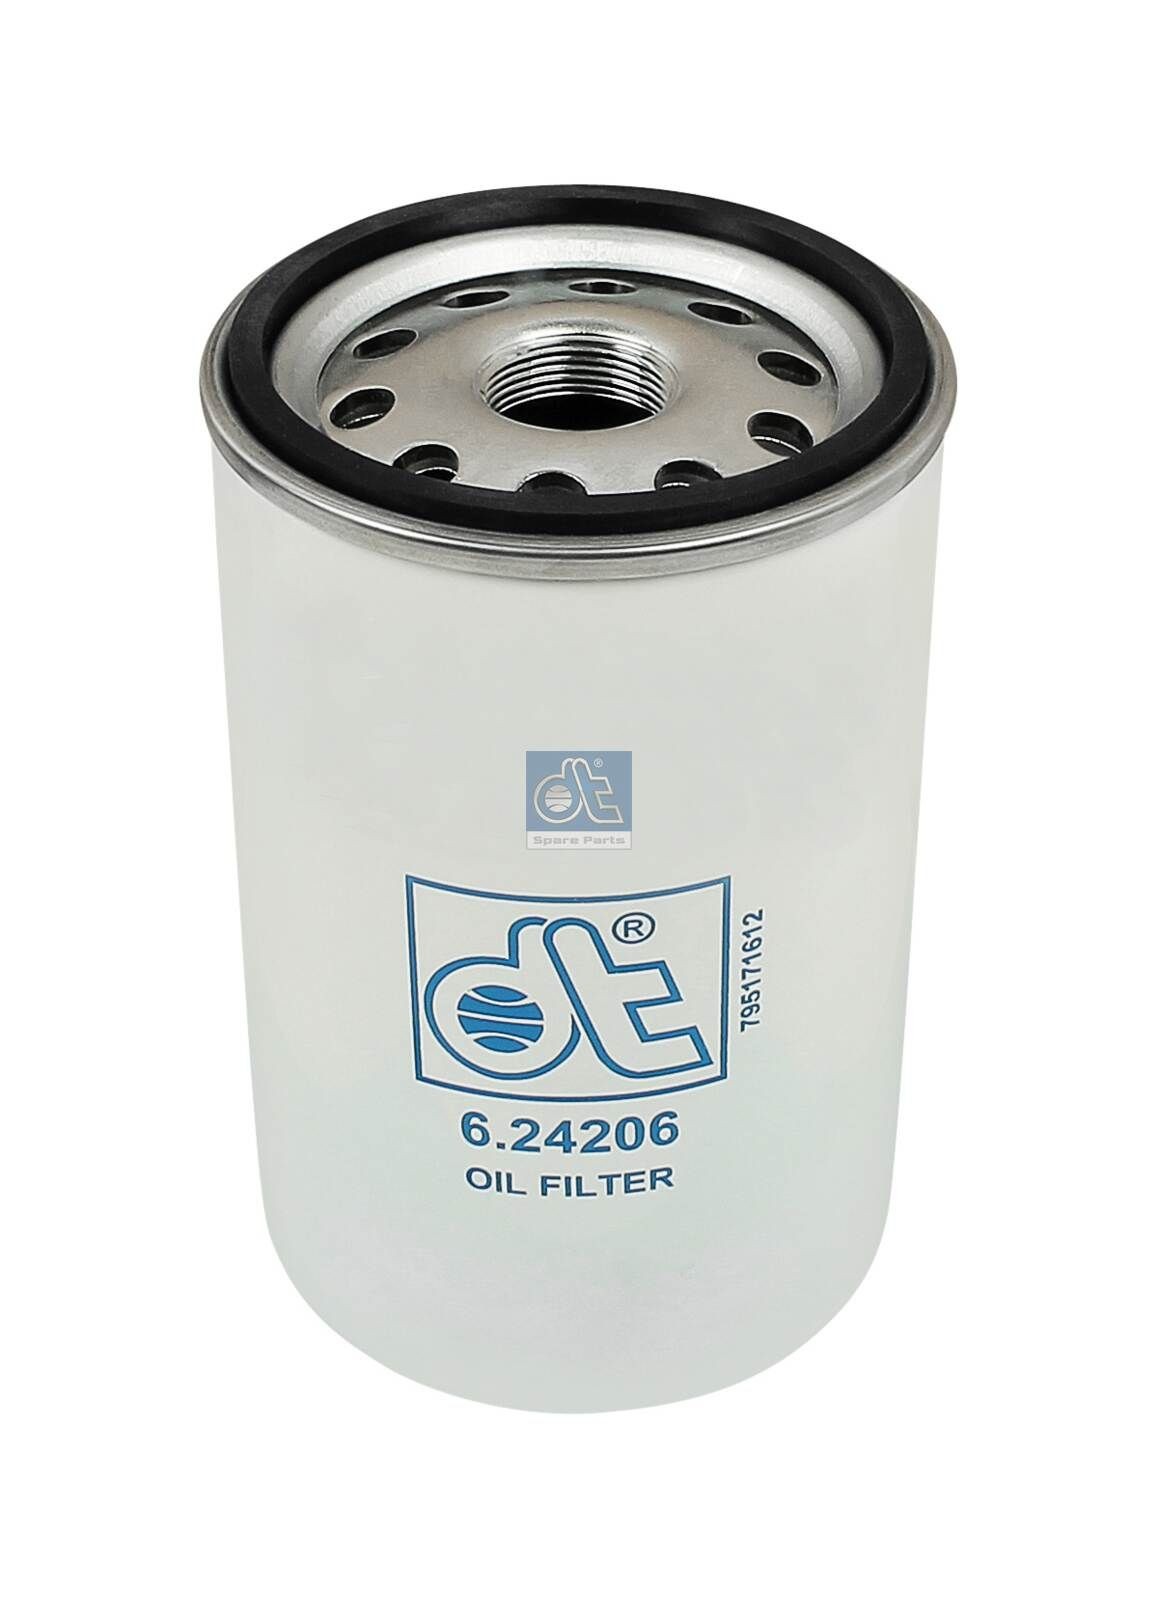 W 1160/2 DT Spare Parts 6.24206 Oil filter 50 01021 176